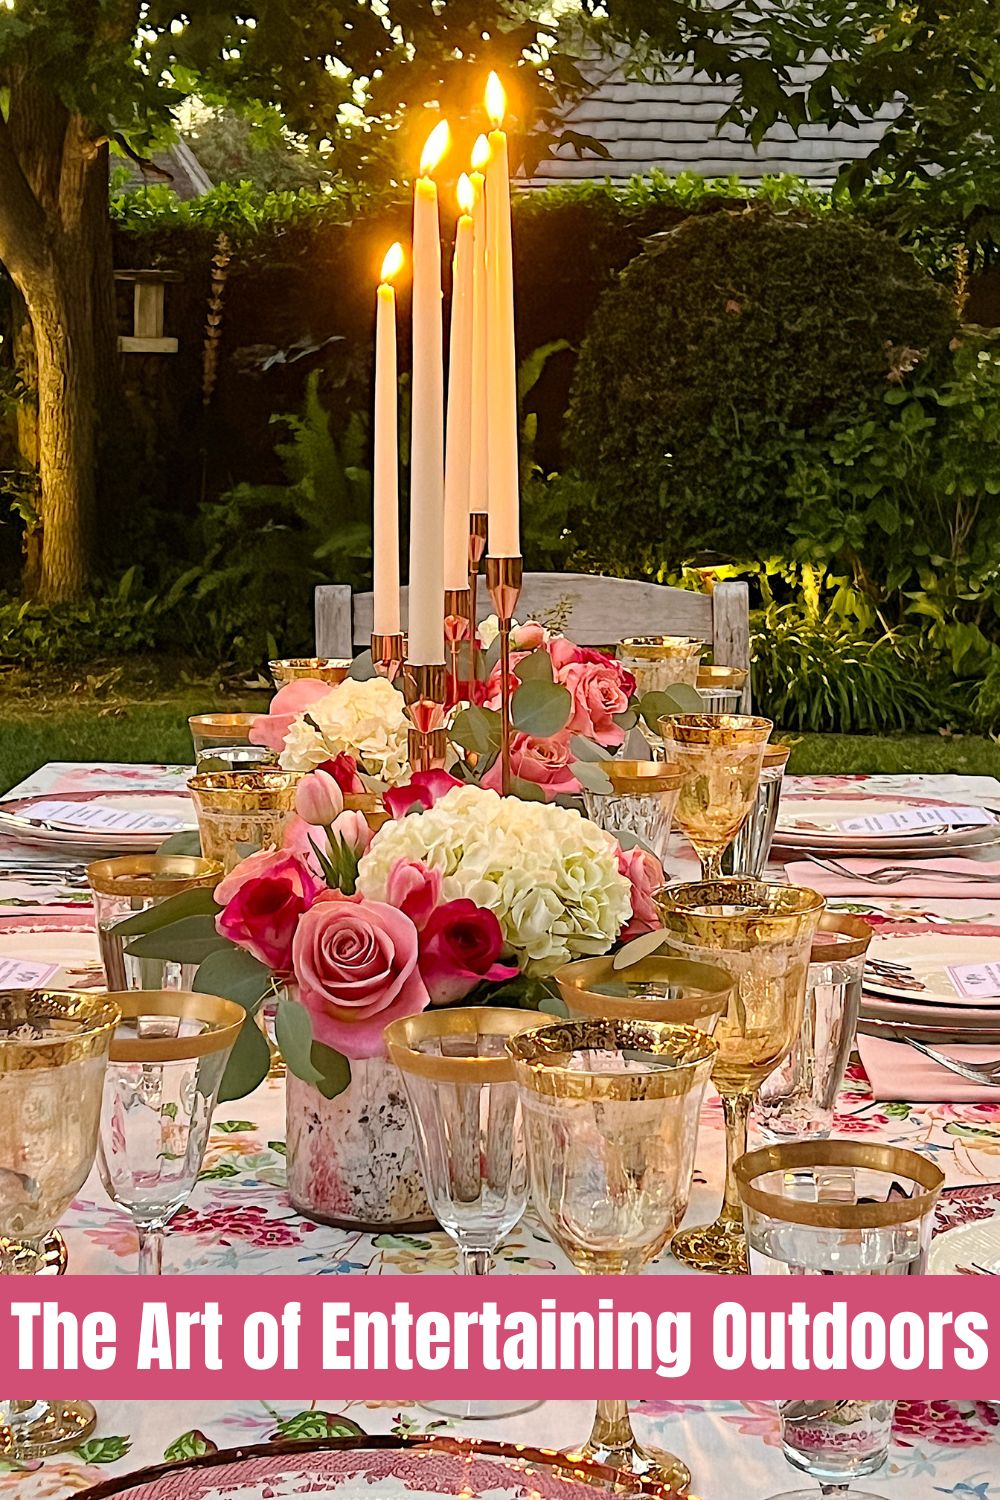 On Saturday, we hosted a dinner in our backyard. I am so passionate about the art of entertaining even when we have never met our guests!